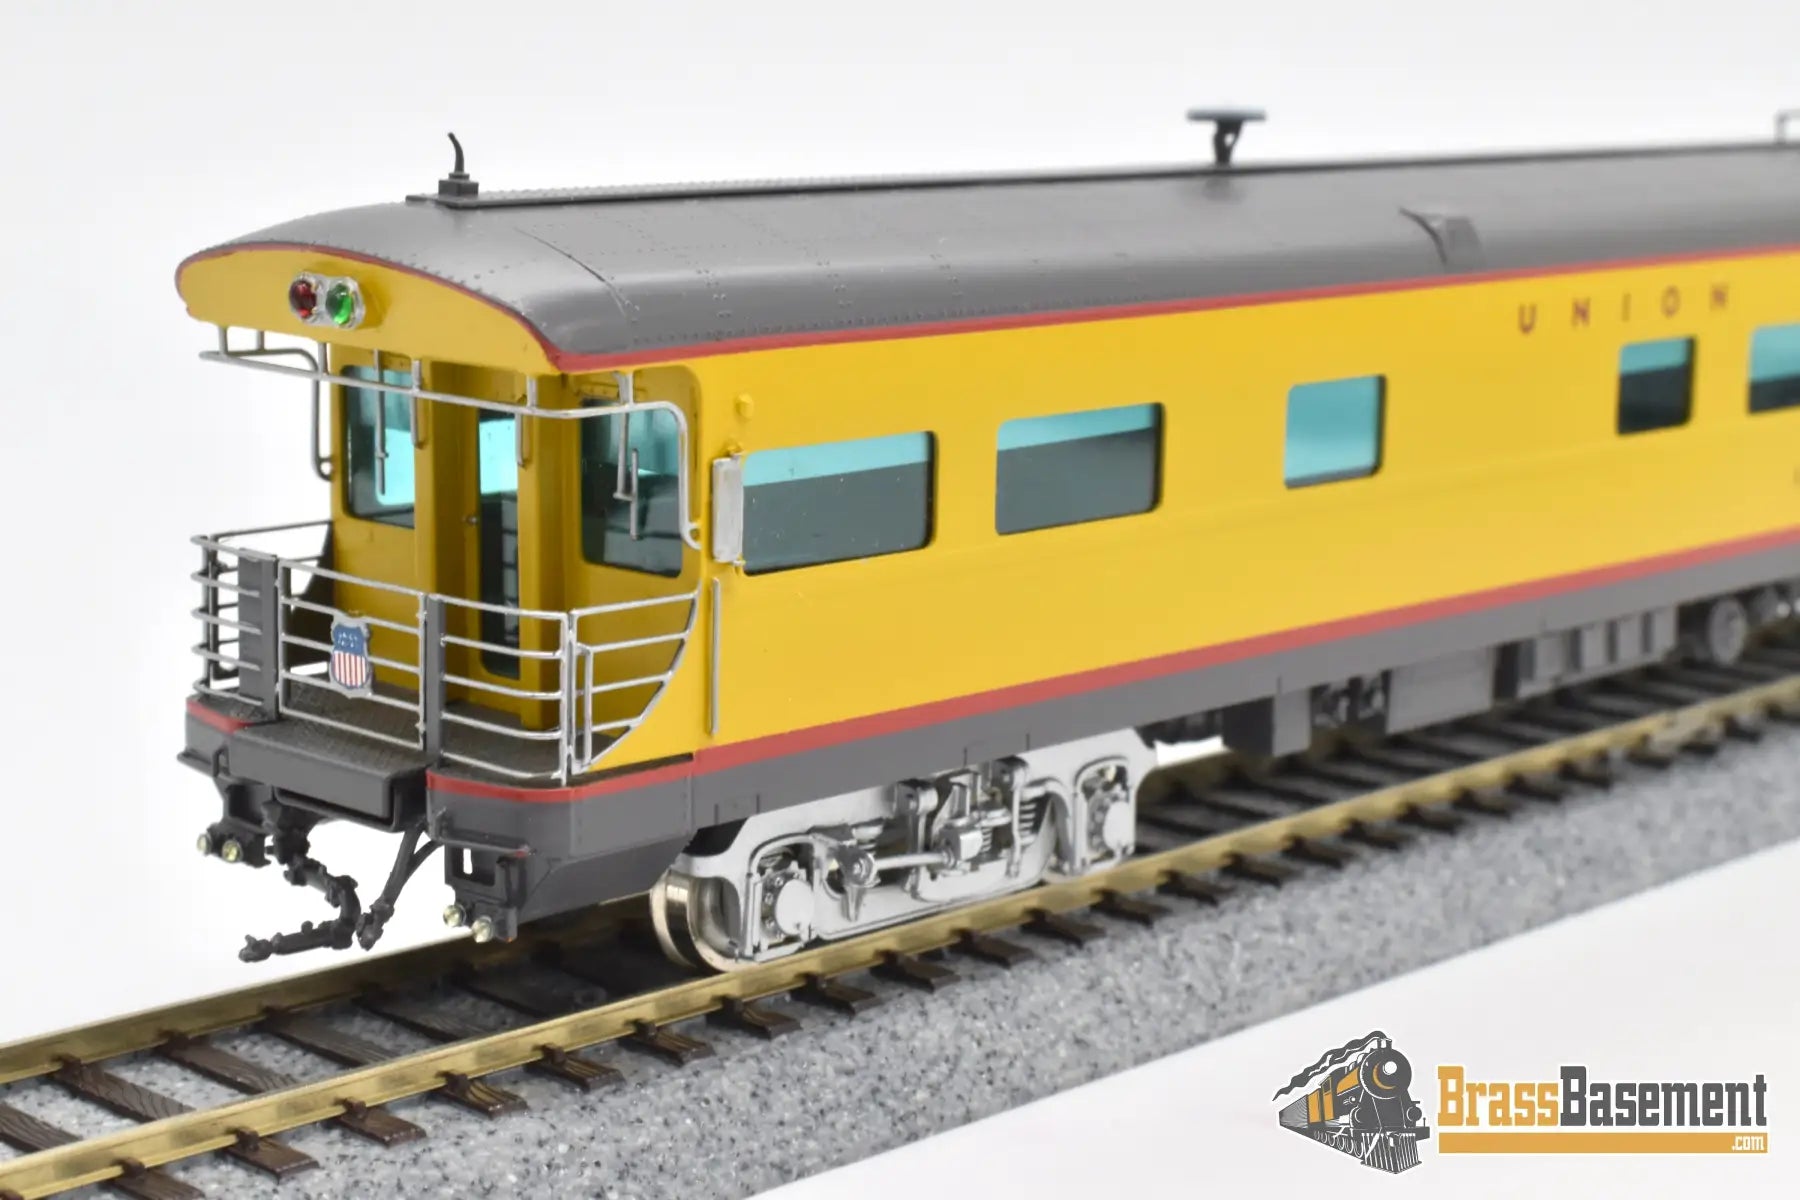 Ho Brass - Cascade Models Up Union Pacific Business Car #114 Boyd Reyes C/P Soundcar Installed